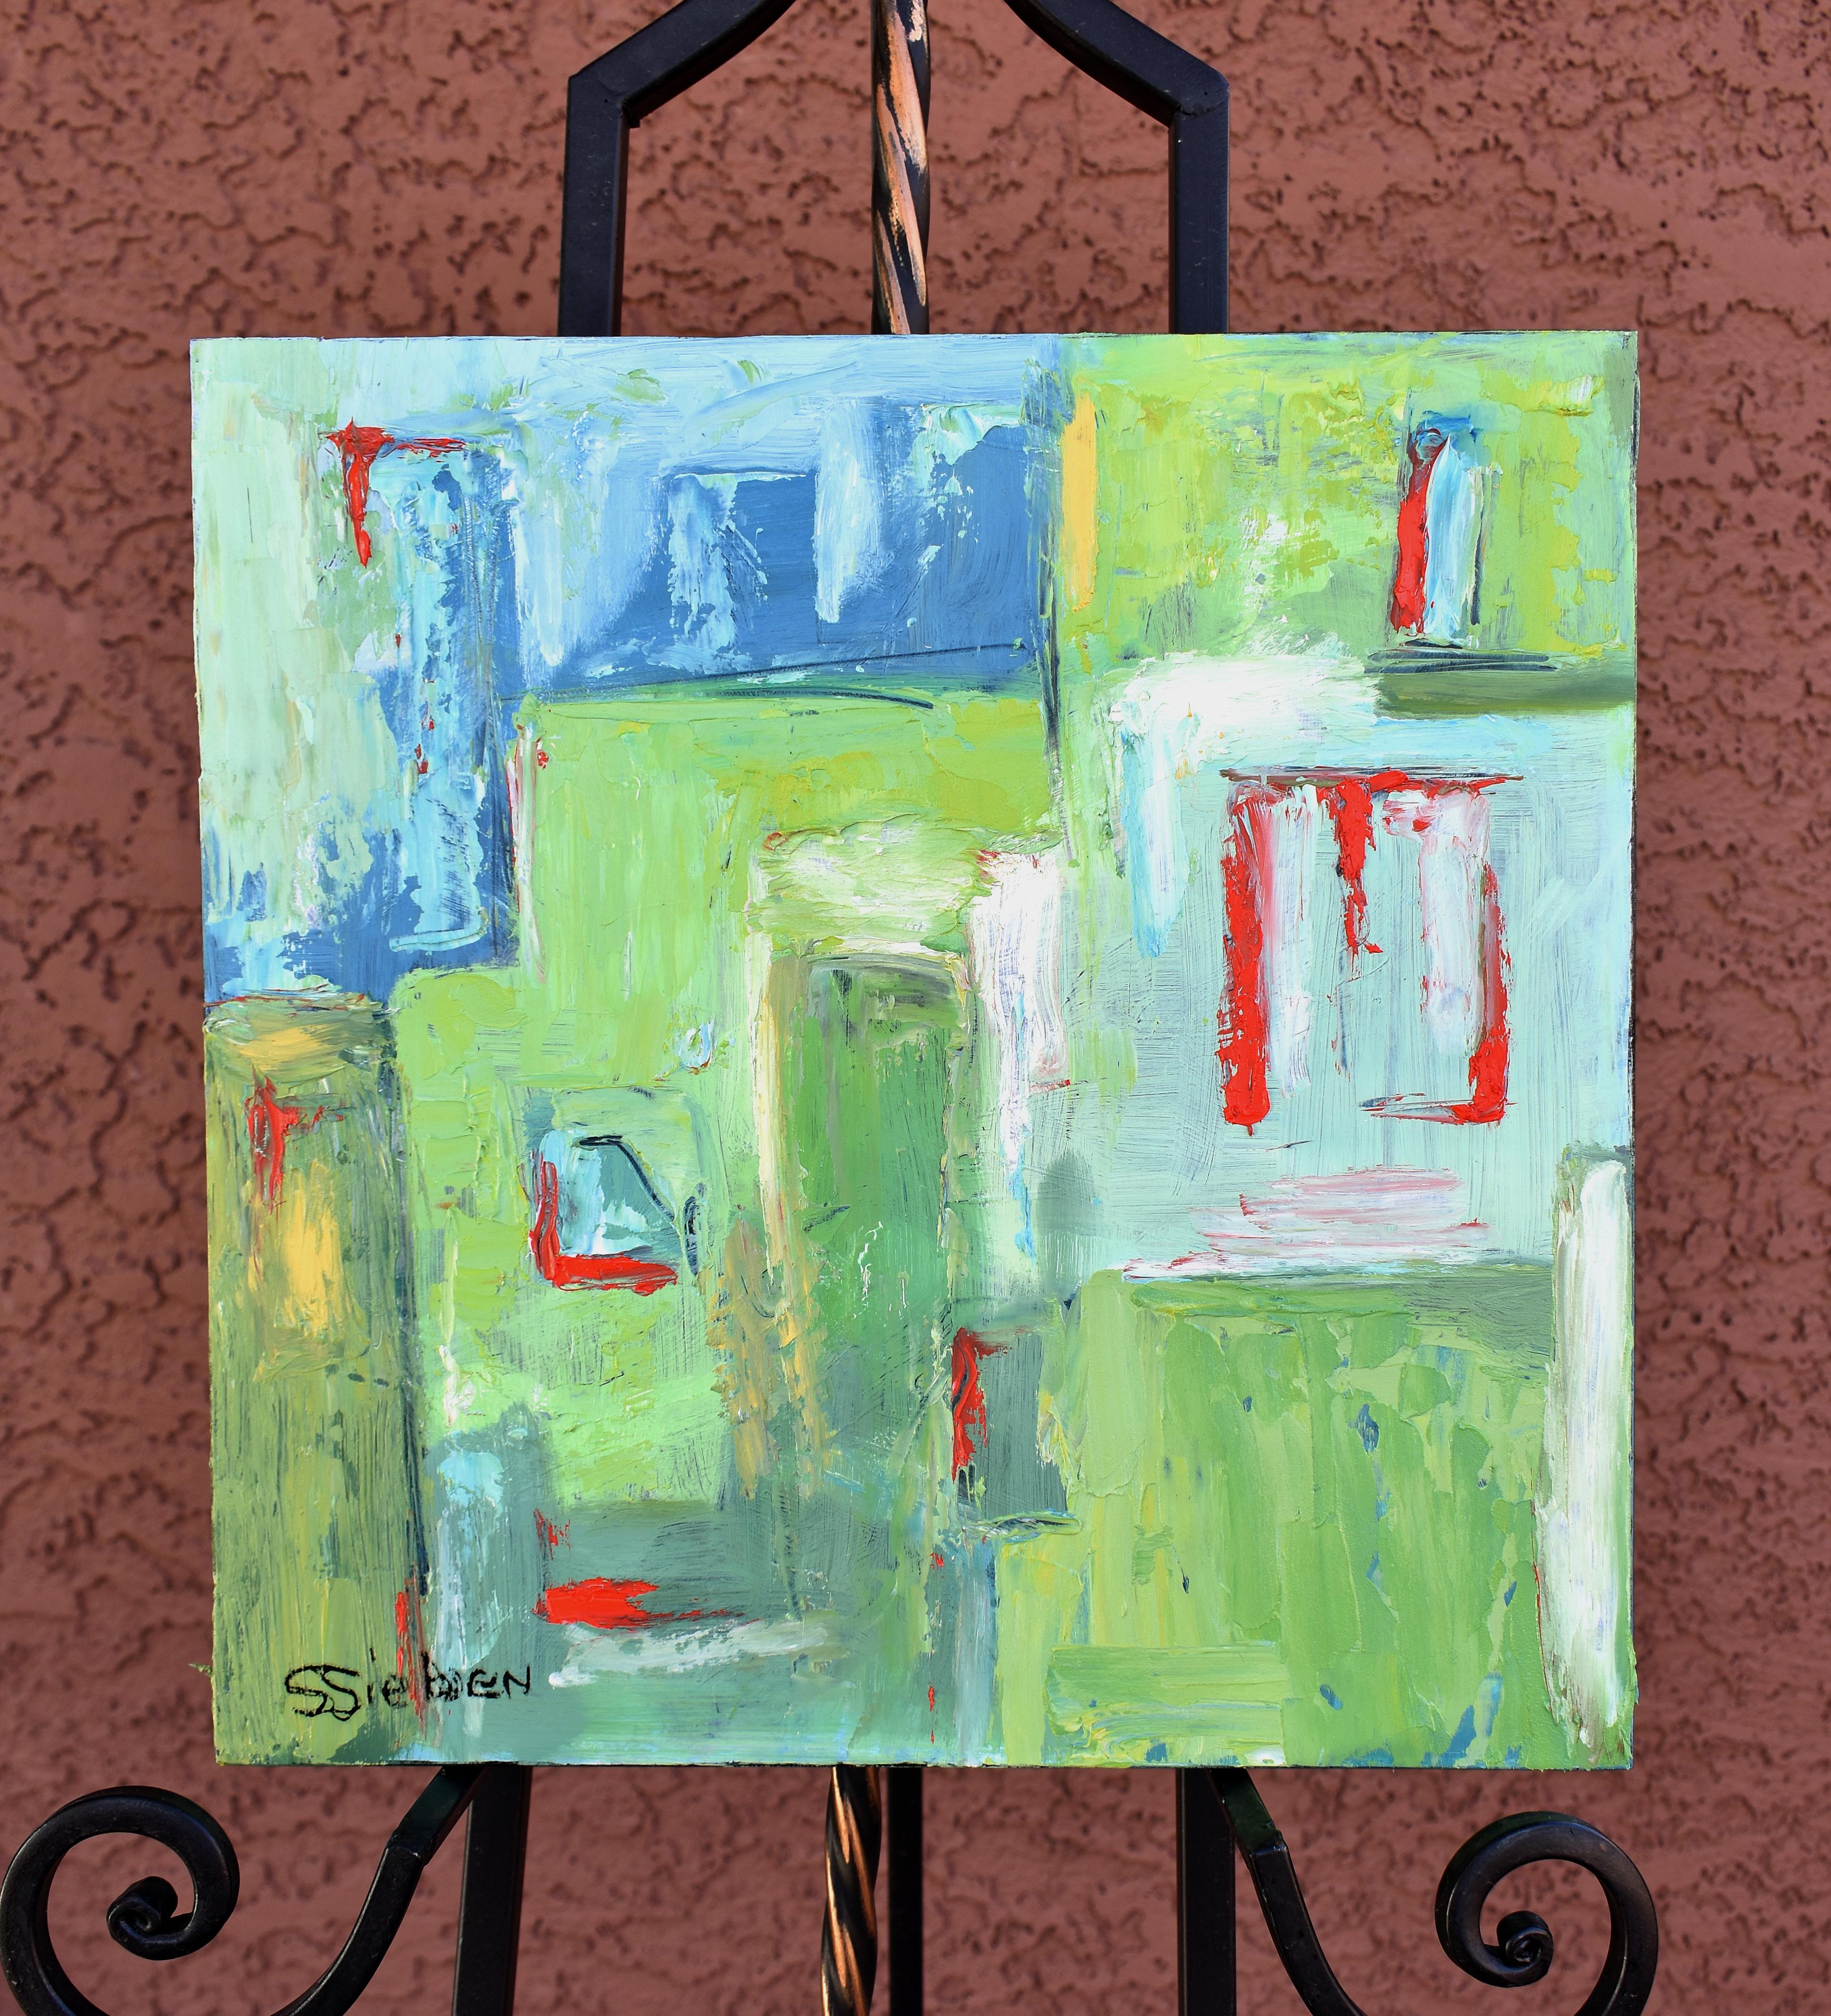 Windows - Abstract Painting by Sharon Sieben